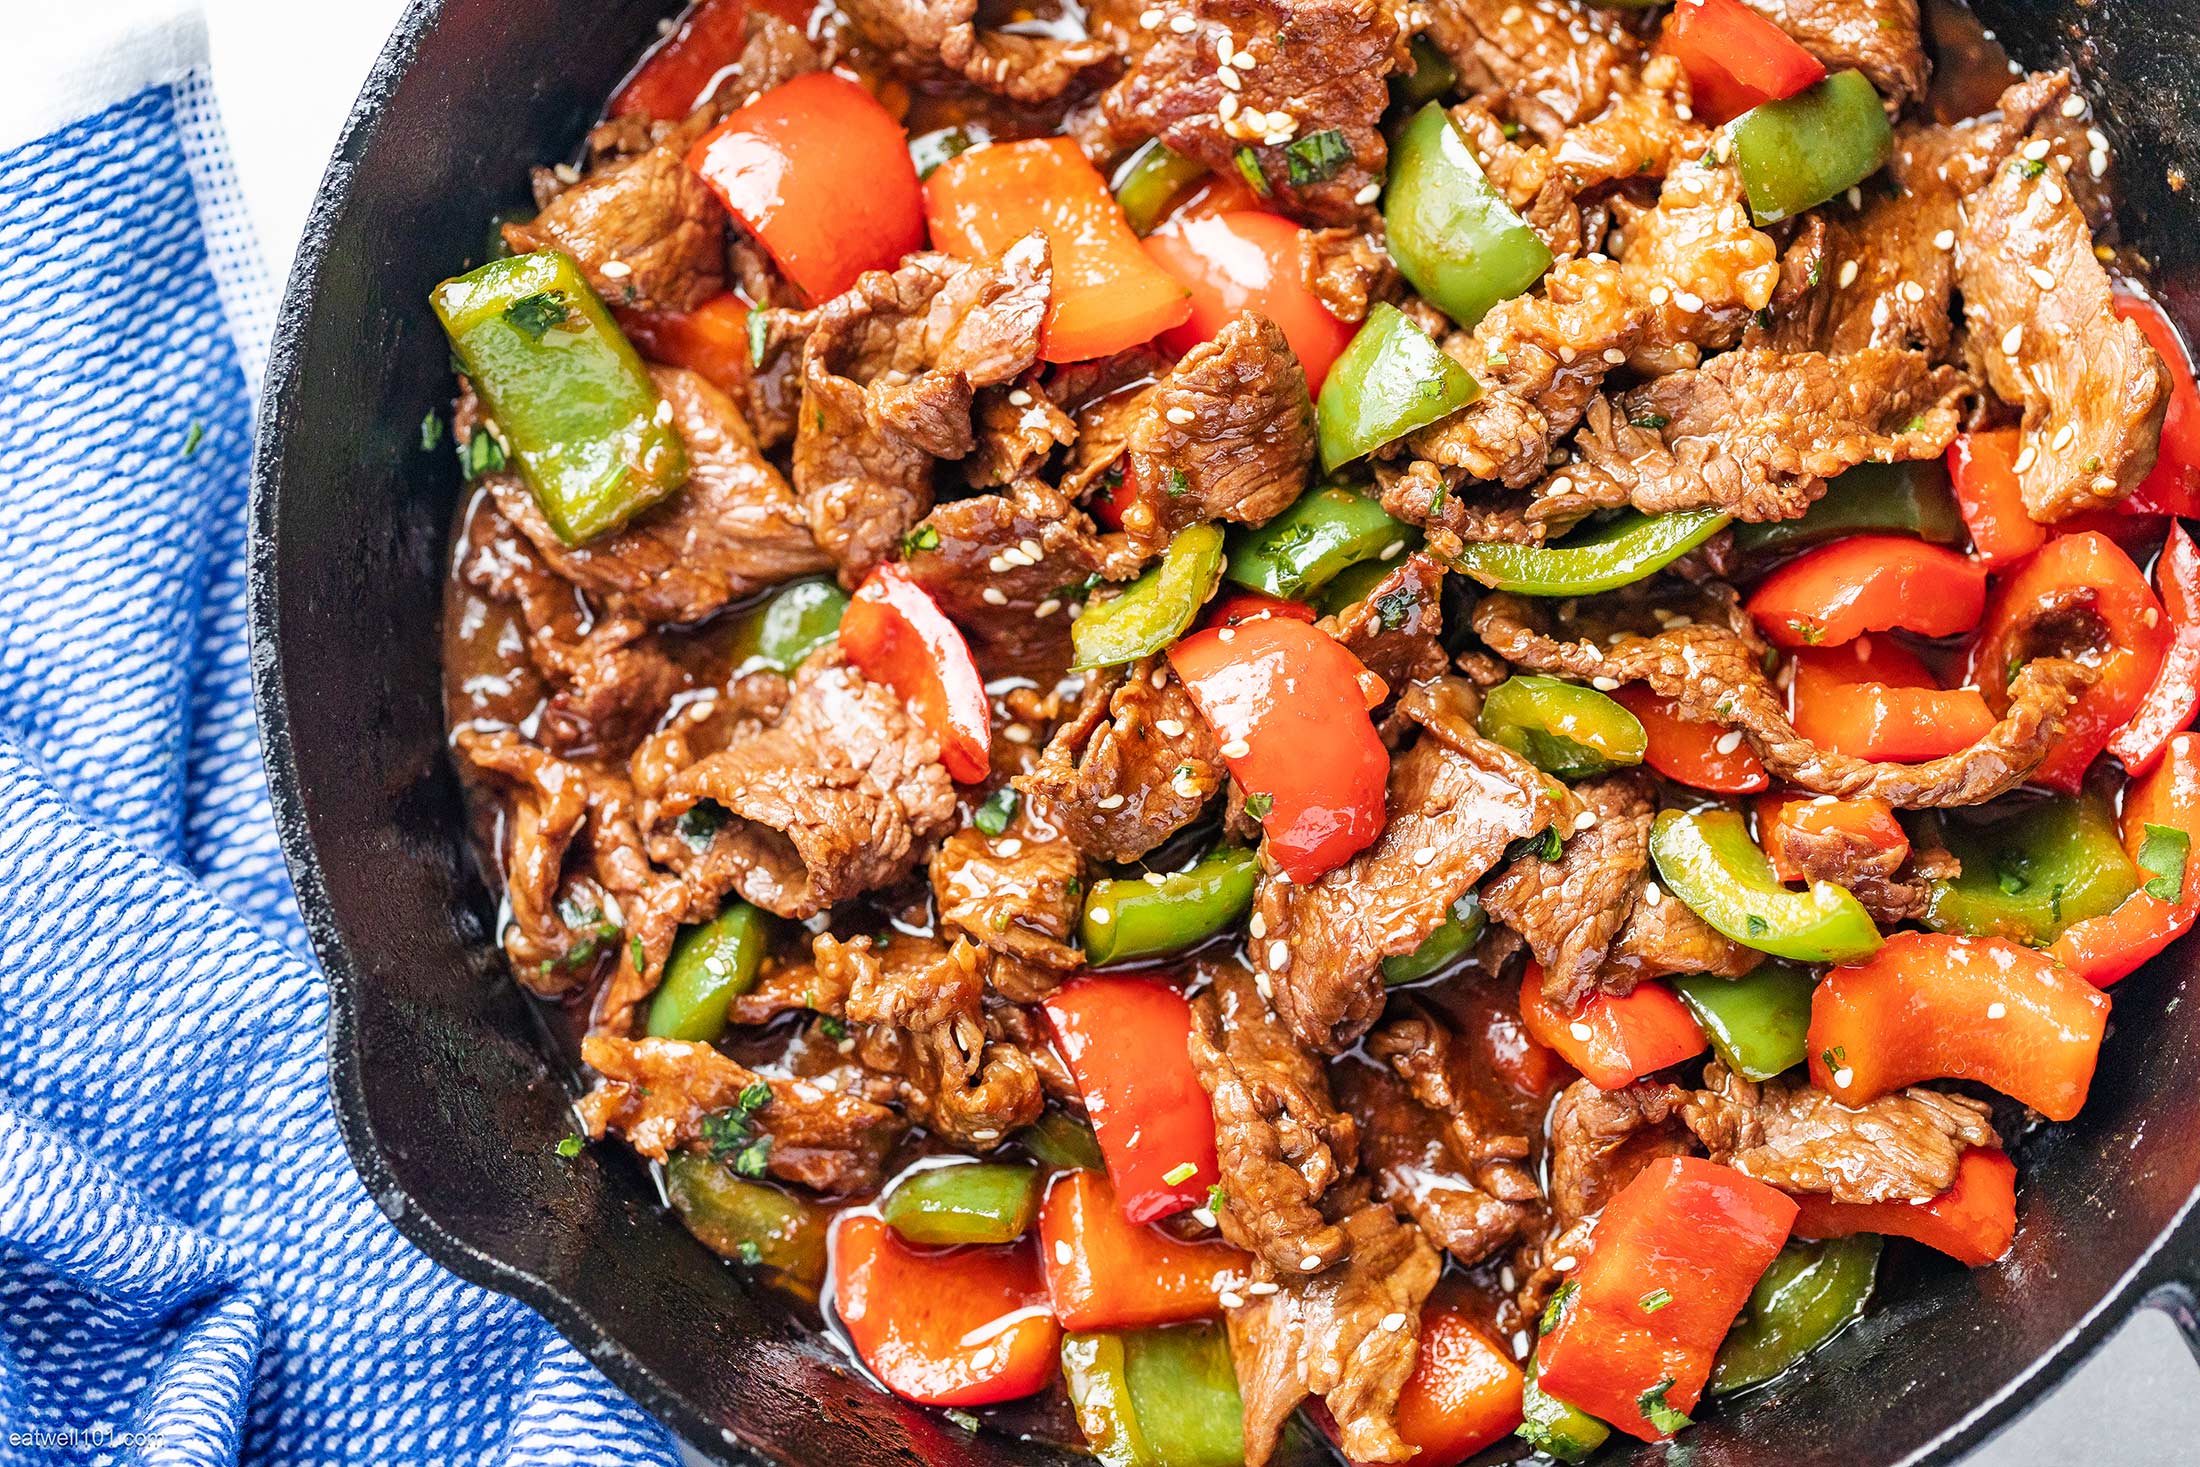 18 Simple Recipes with Beef Steak